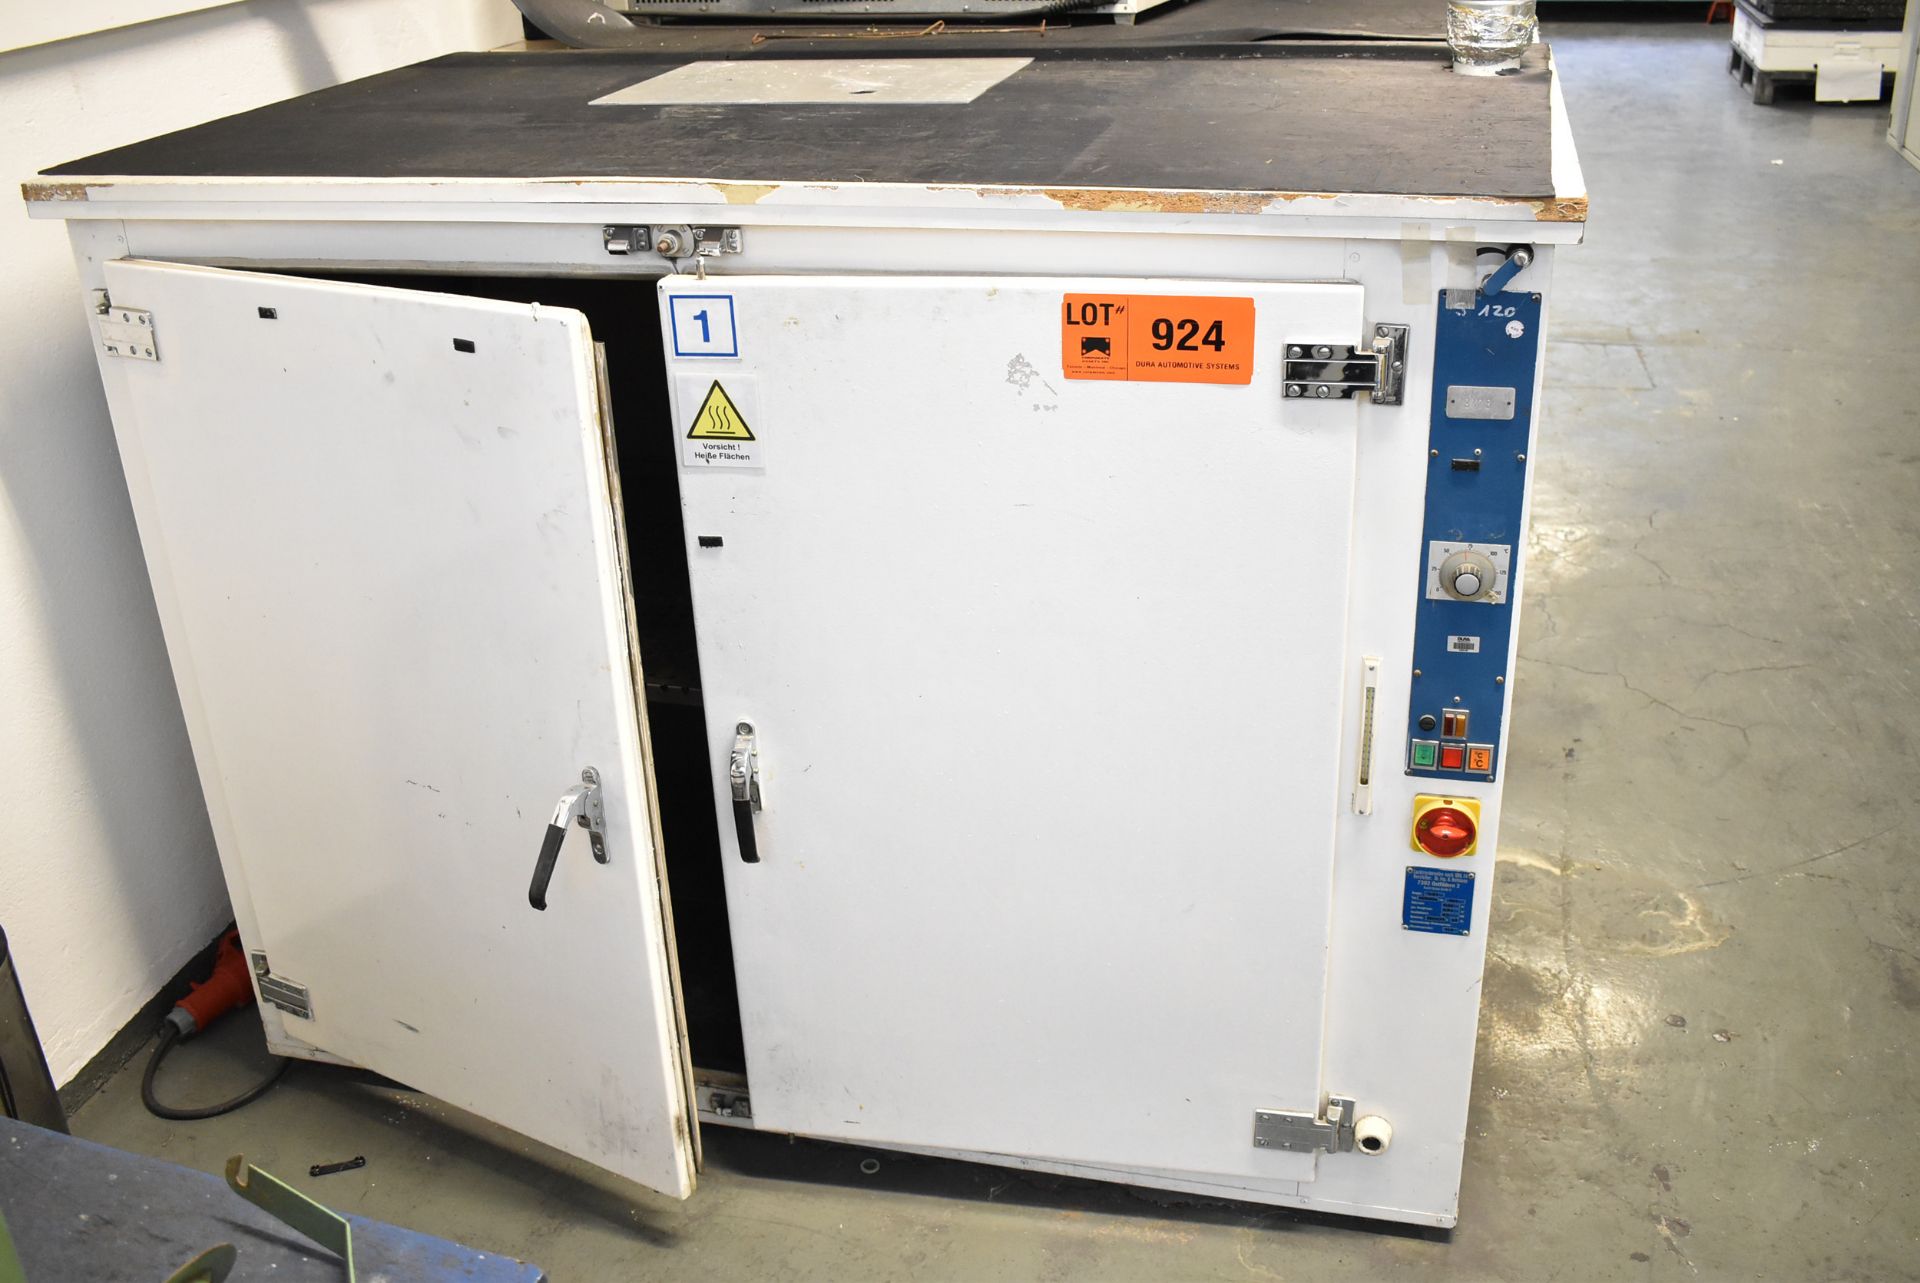 HORO 600V/SO ELECTRIC LAB OVEN WITH 150 DEG. C MAX. TEMP., S/N N/A (BAU 23) [Removal Fee = € 55 +